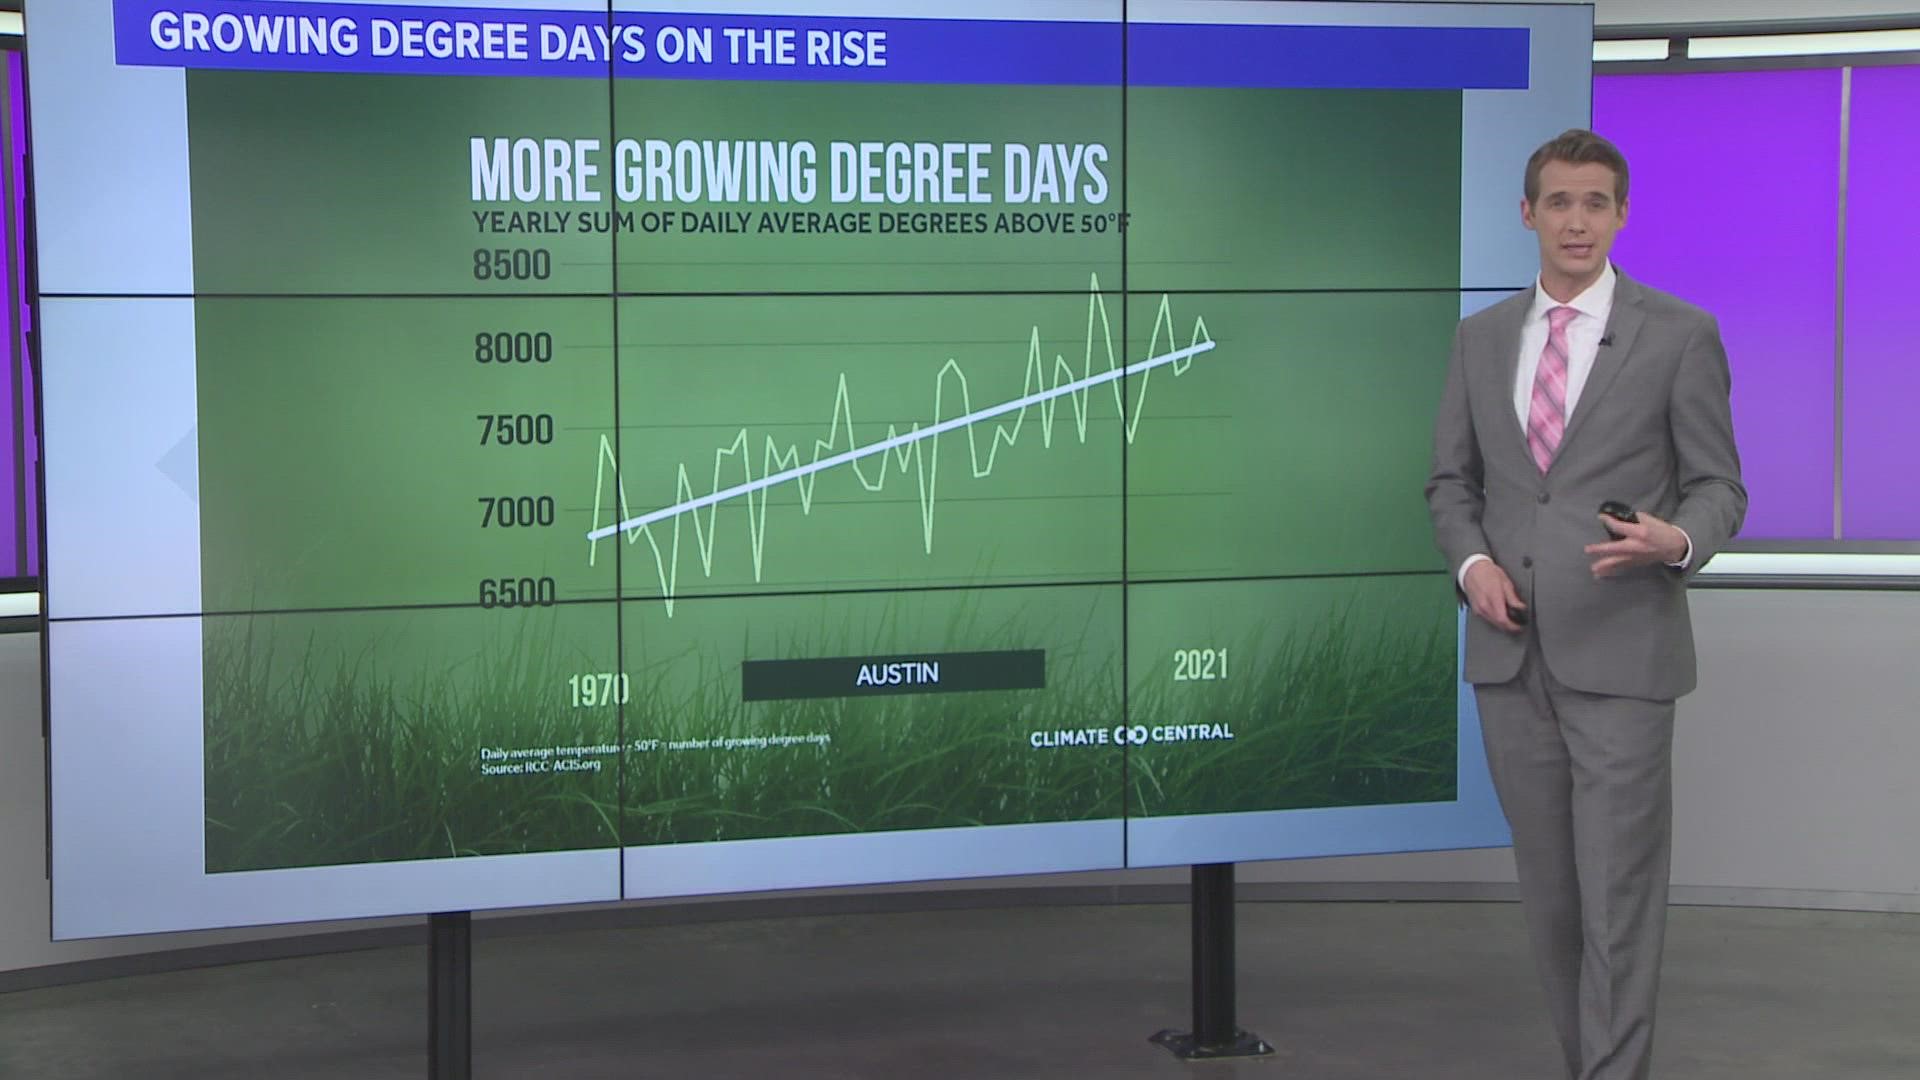 Recent research has shown that growing degree days are on the rise. Growing degree days refer to the measure of accumulated heat over the course of growing season.